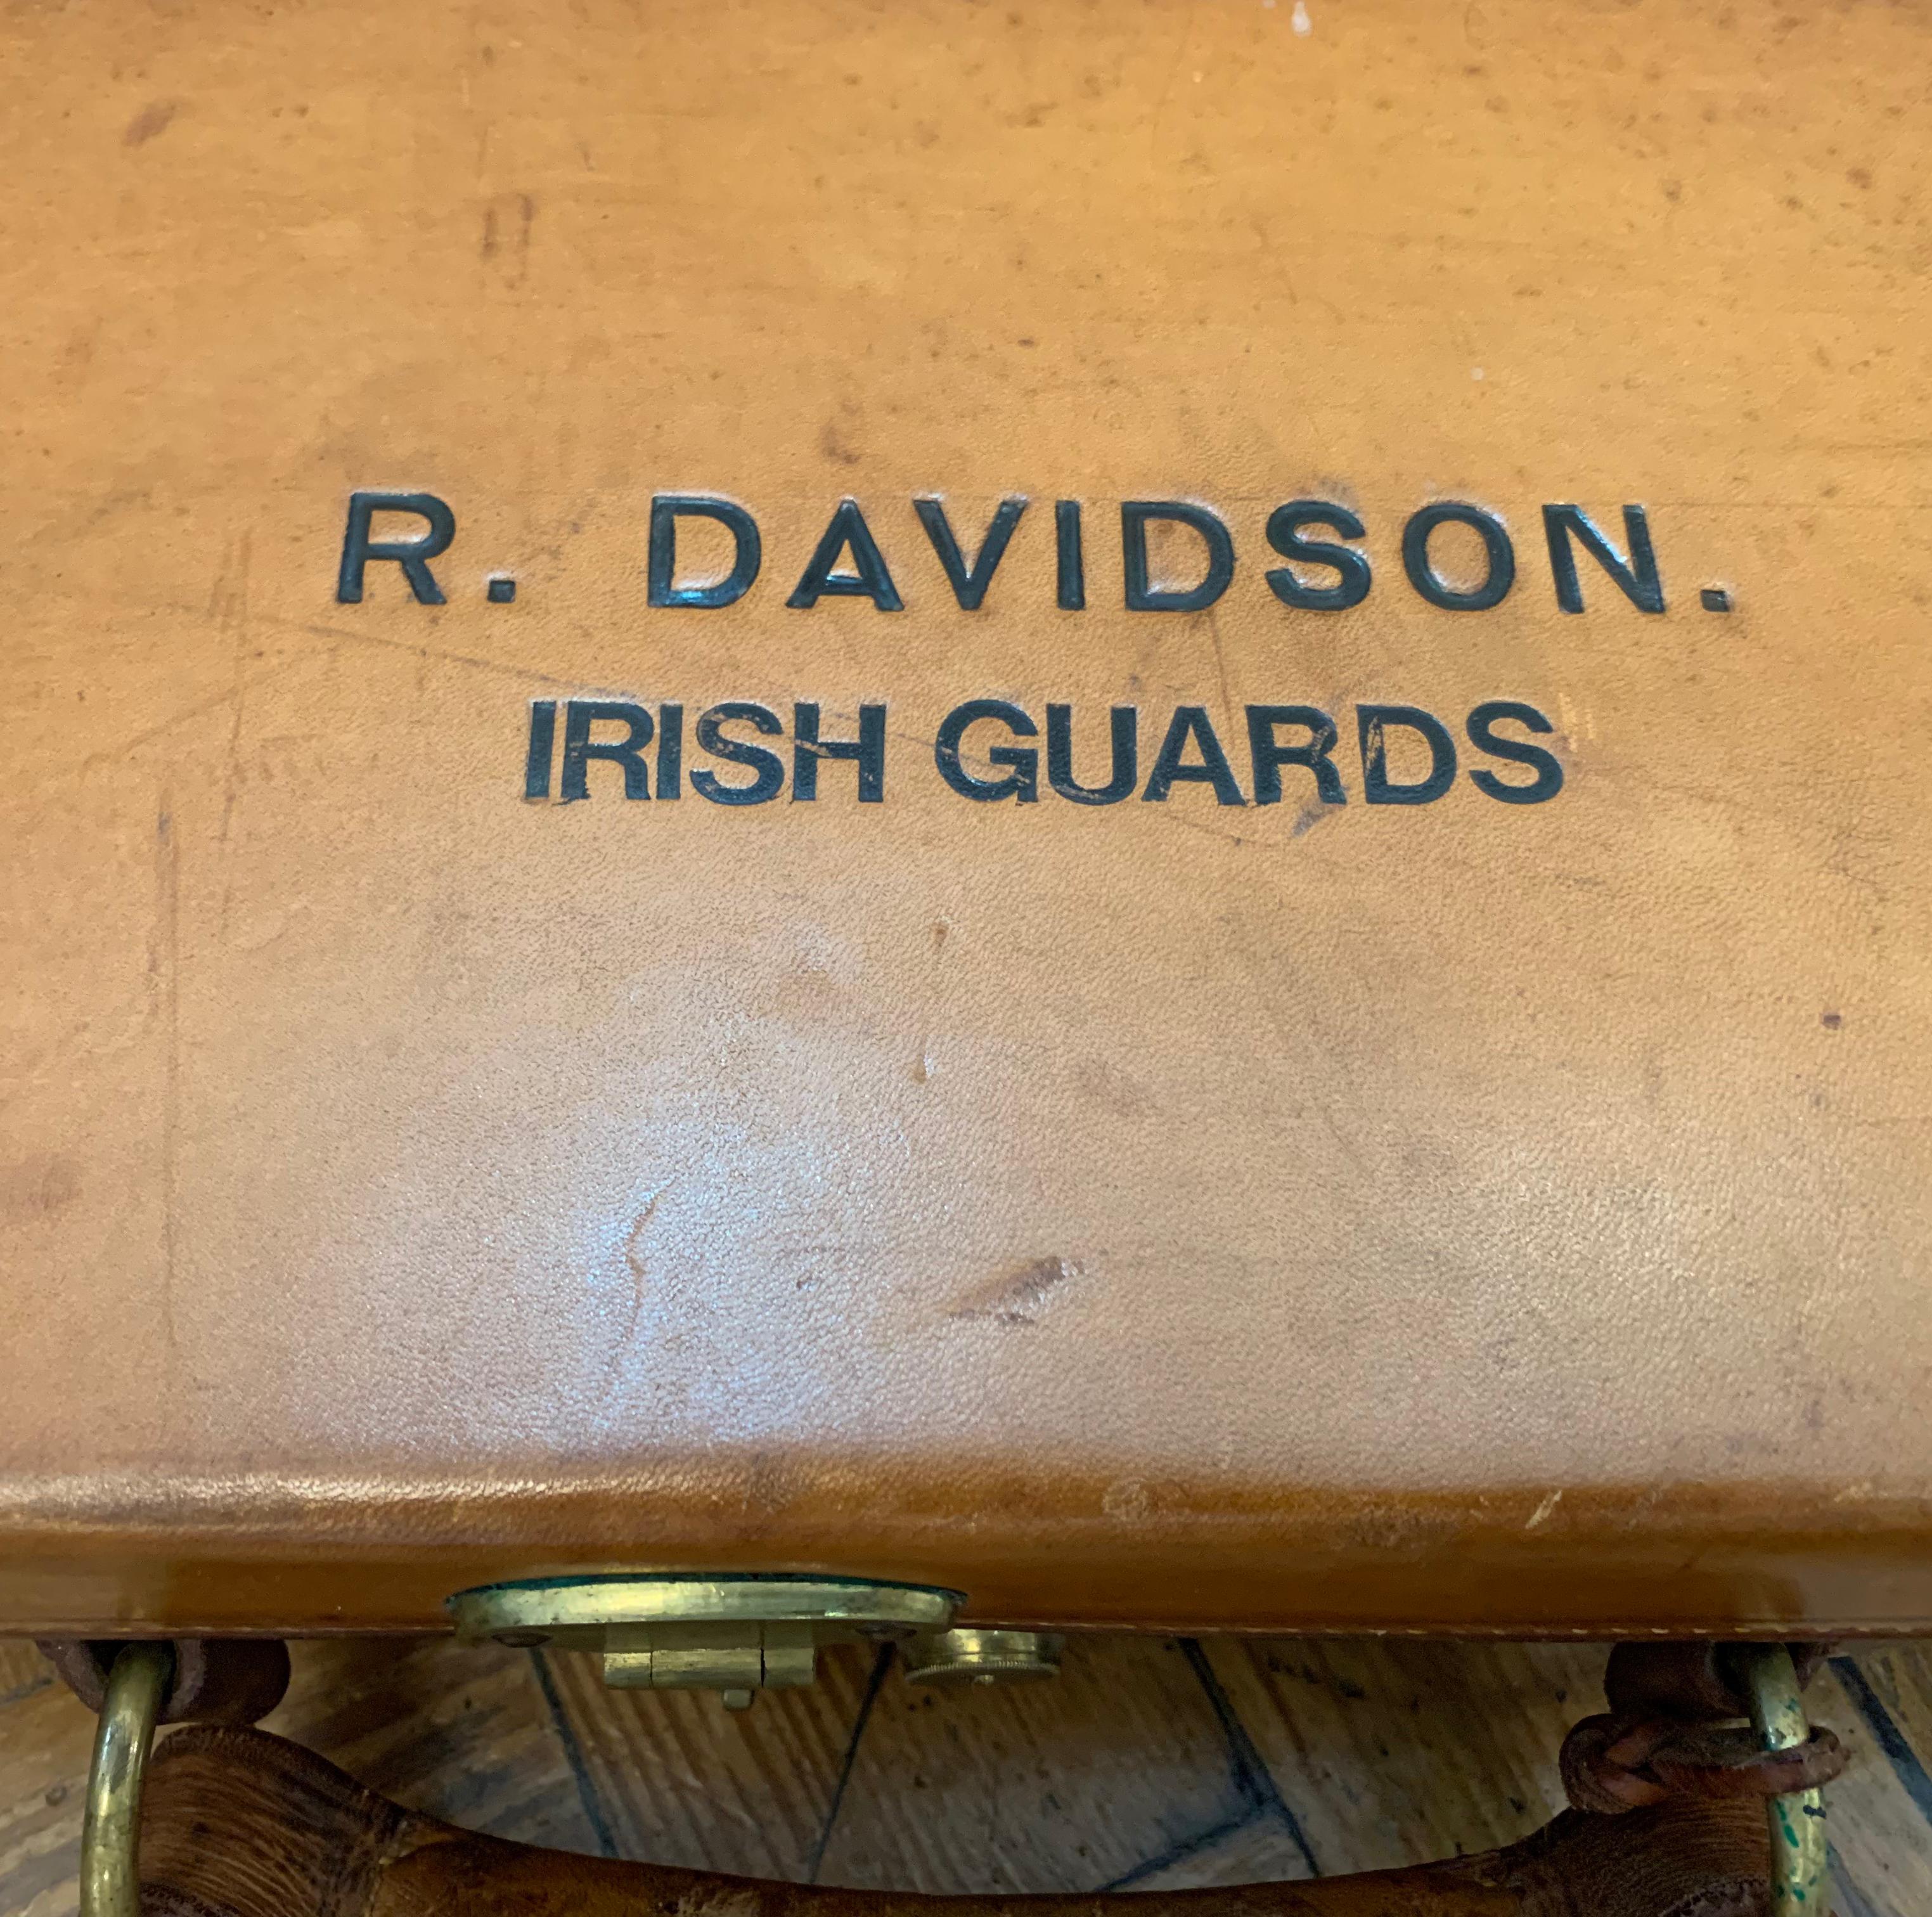 A stunning late Victorian, early Edwardian Leather over oak gun case. Possibly for a hunting rifle or a Snipers Rifle.

The case is in incredible, almost unused condition. The lid bears the embossed name details of R. Davidson, Irish Guards. We